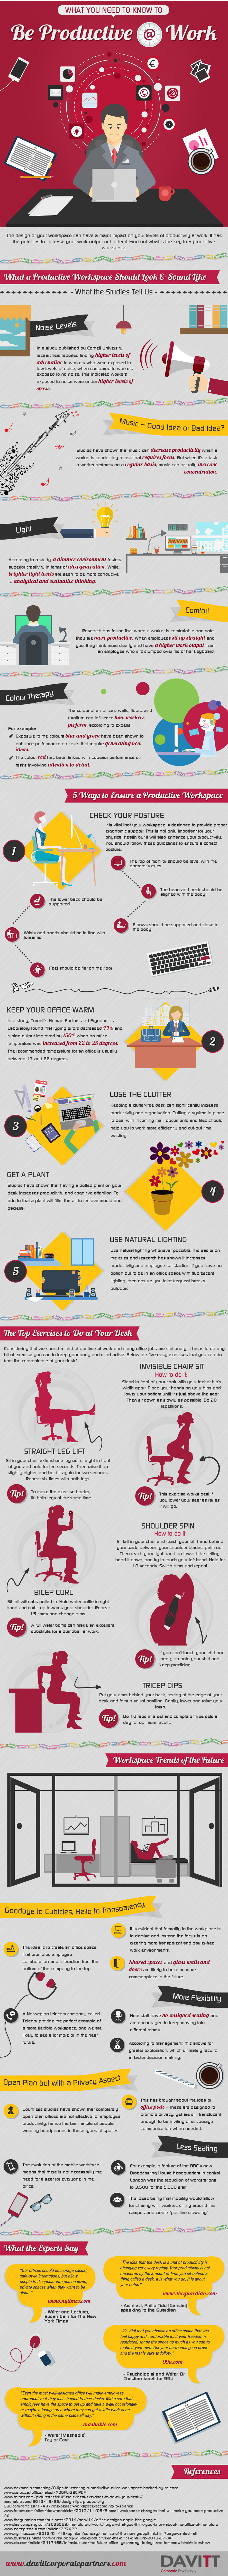 what-you-need-to-know-to-be-productive-at-work-infographic